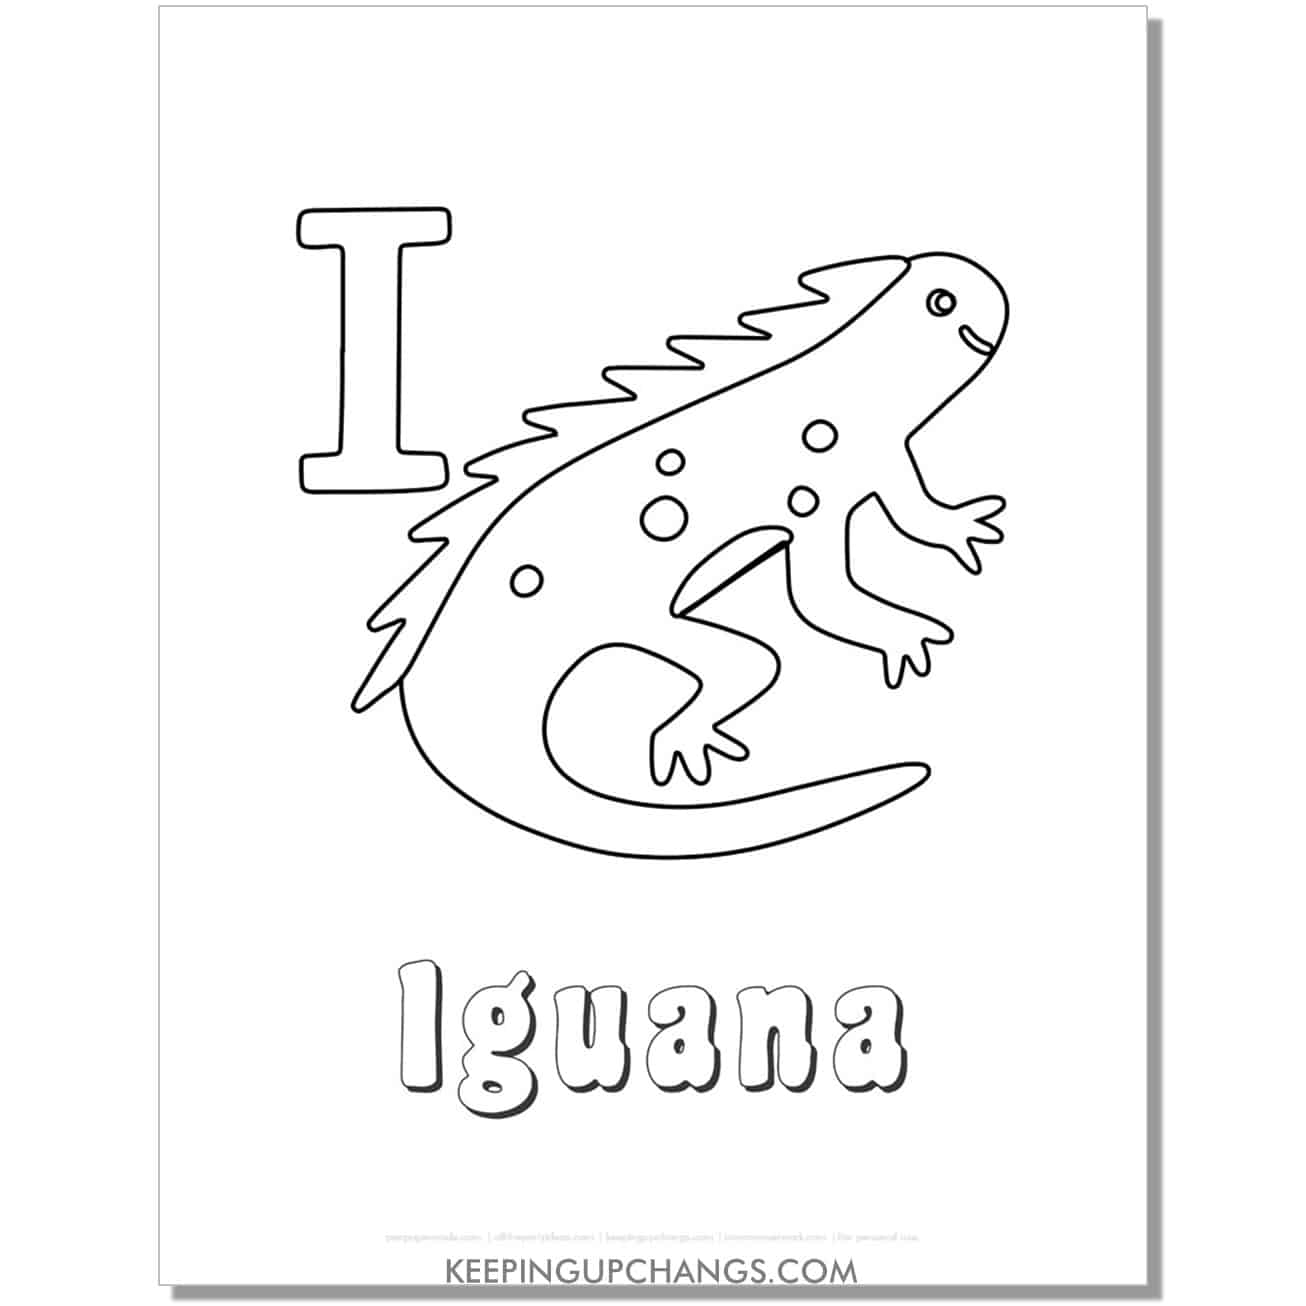 fun abc i coloring page with iguana hand drawing.